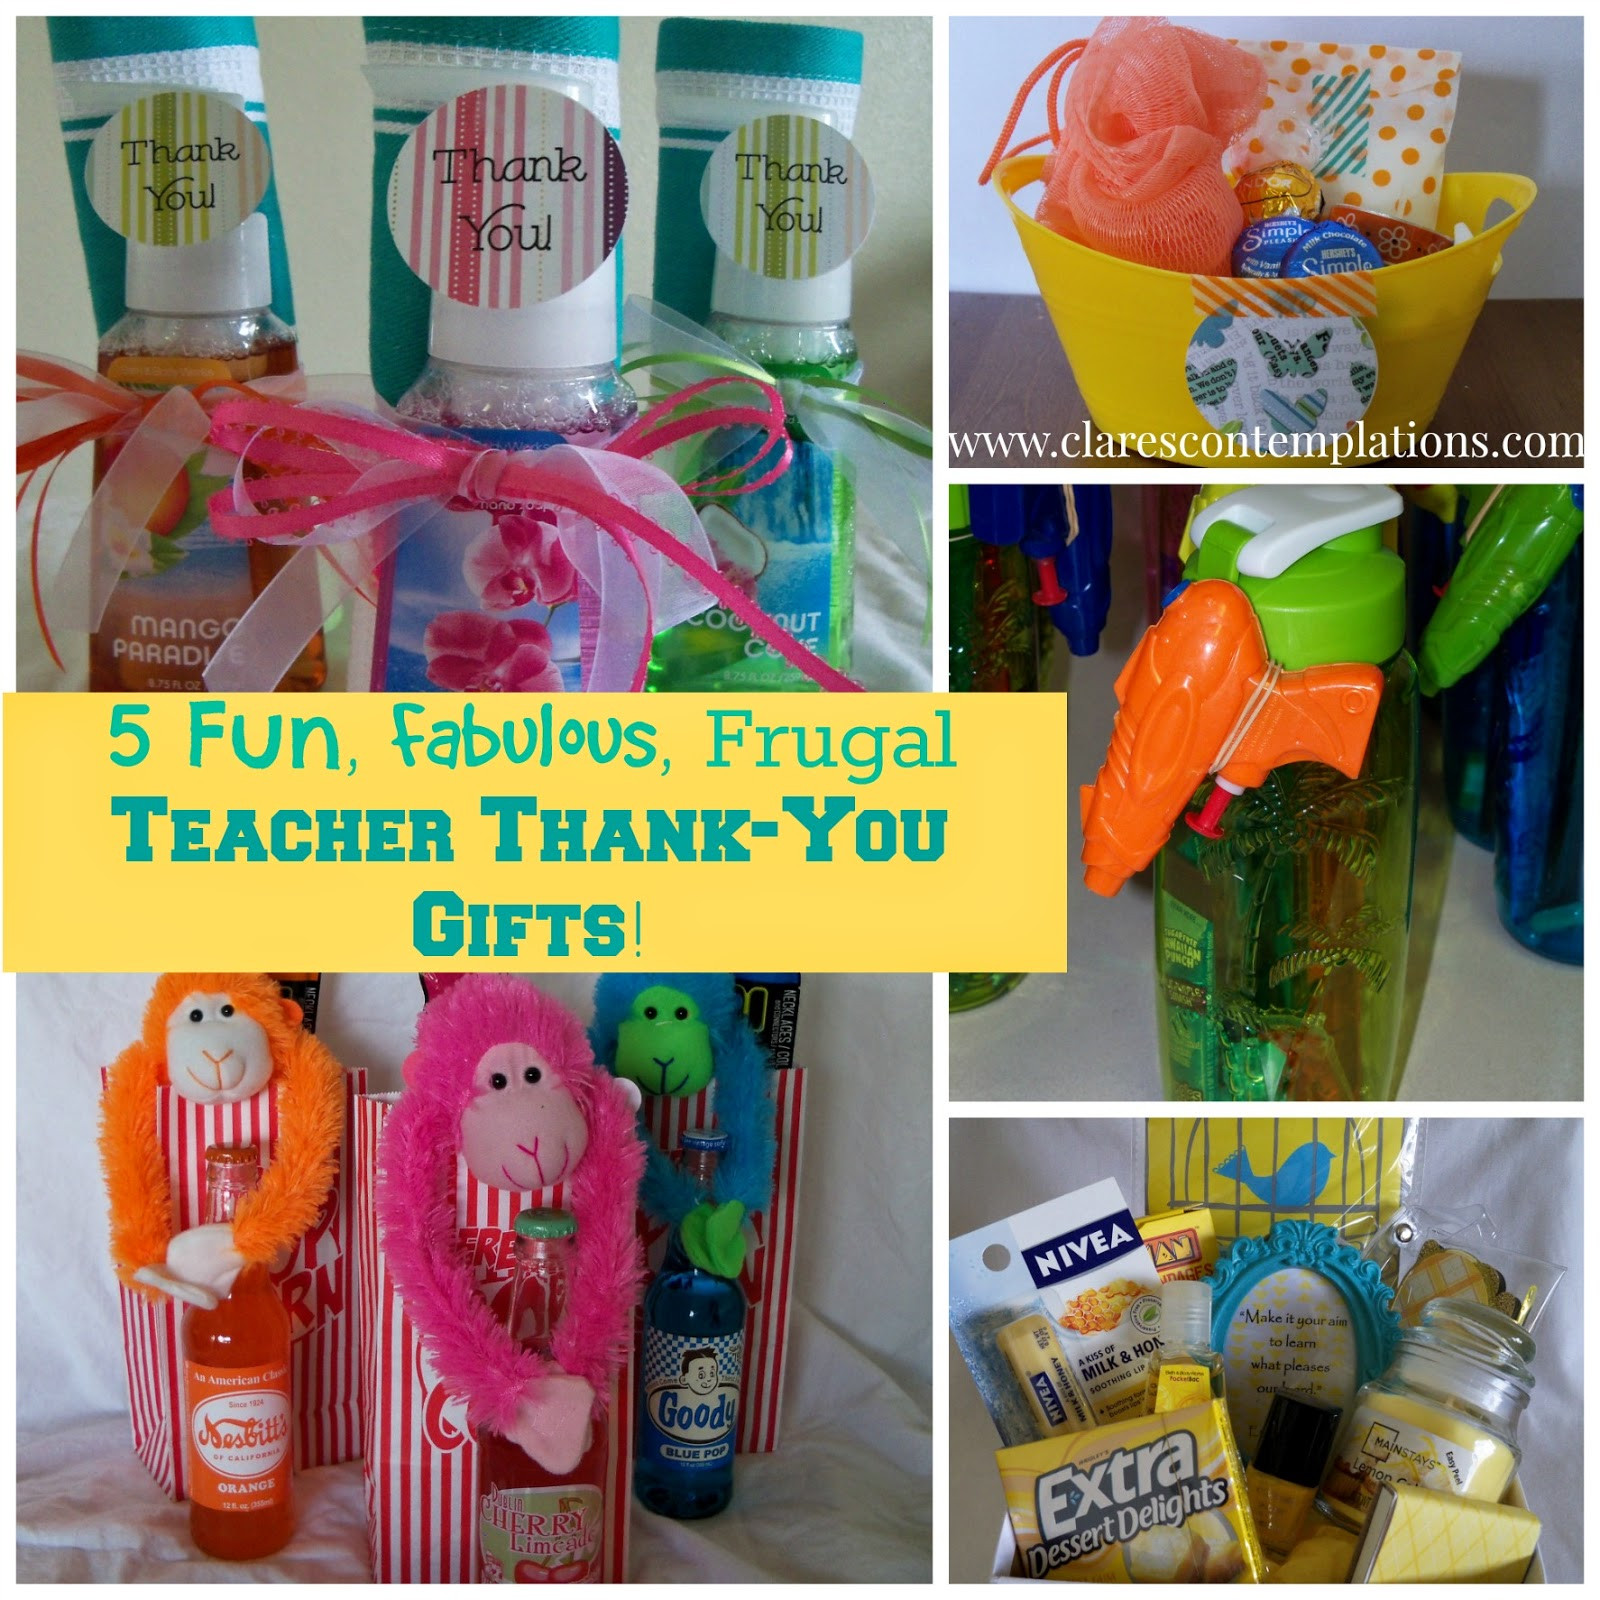 Thank You Teacher Gift Ideas
 Clare s Contemplations 5 Unique Thoughtful and Frugal